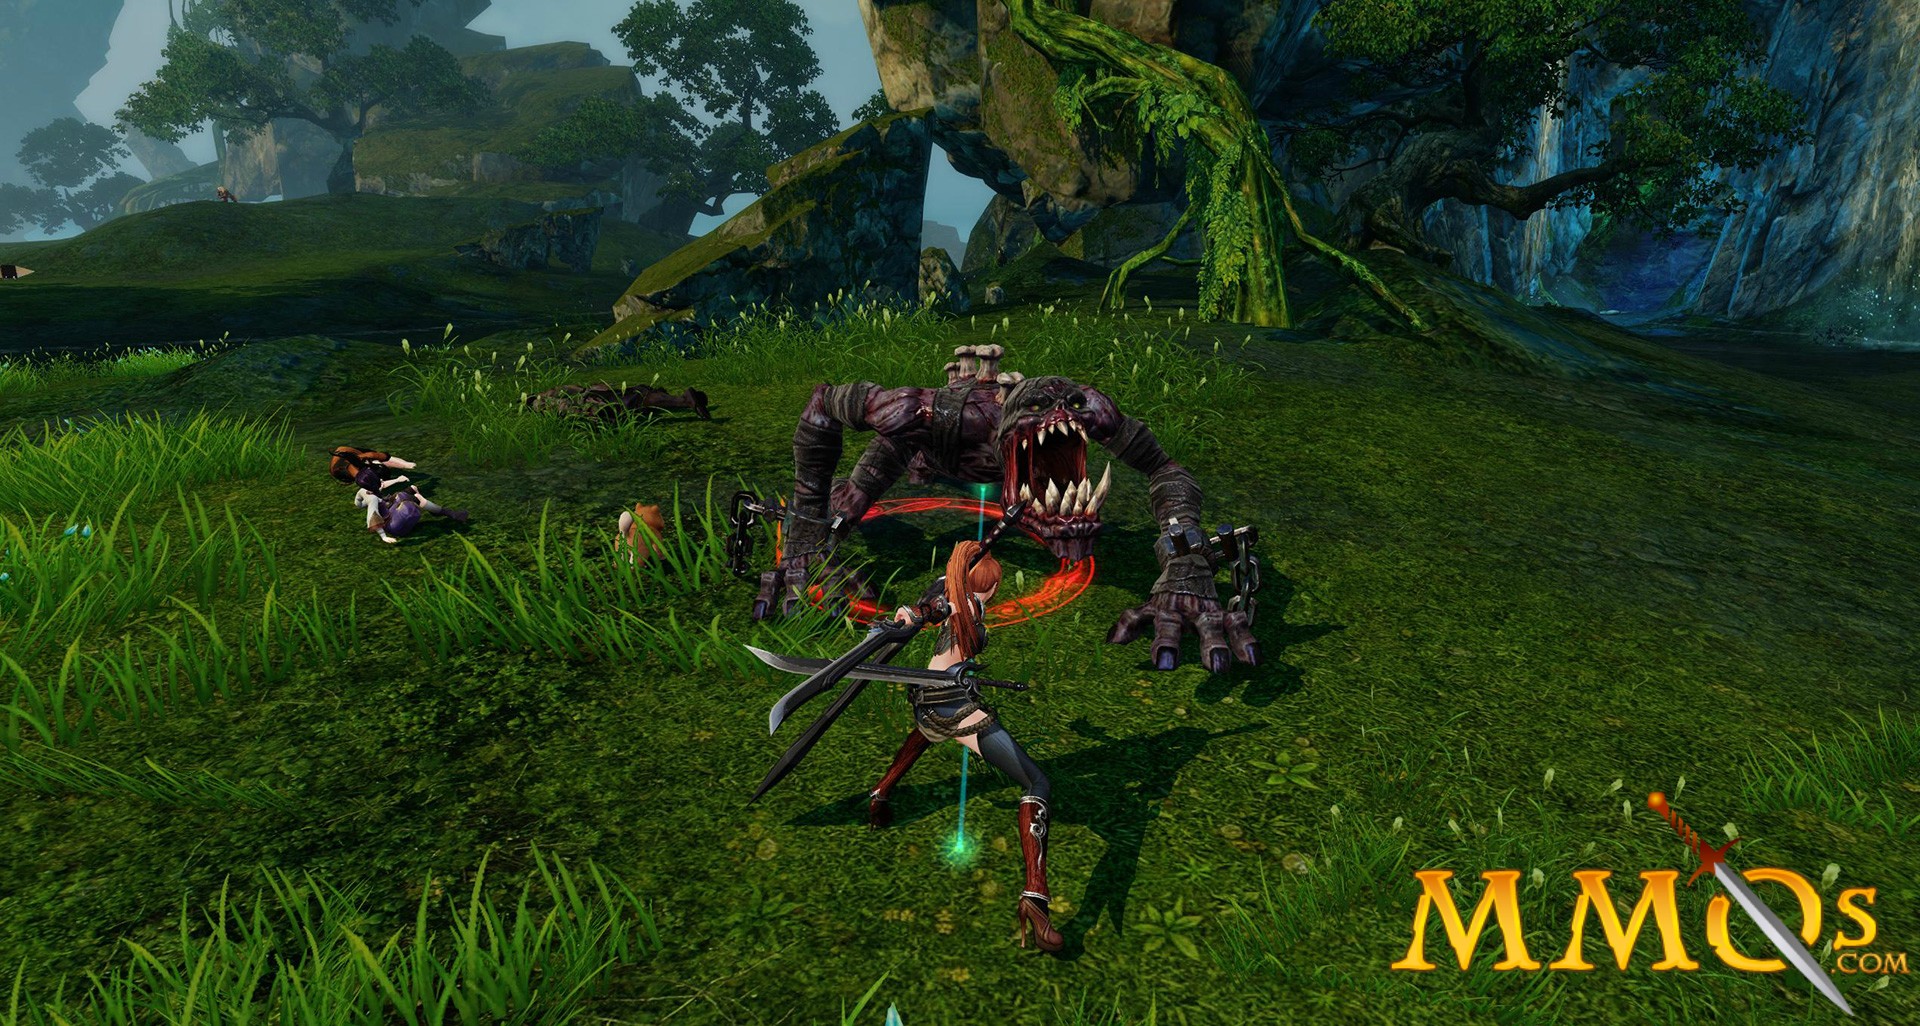 play mmorpg games free online without download